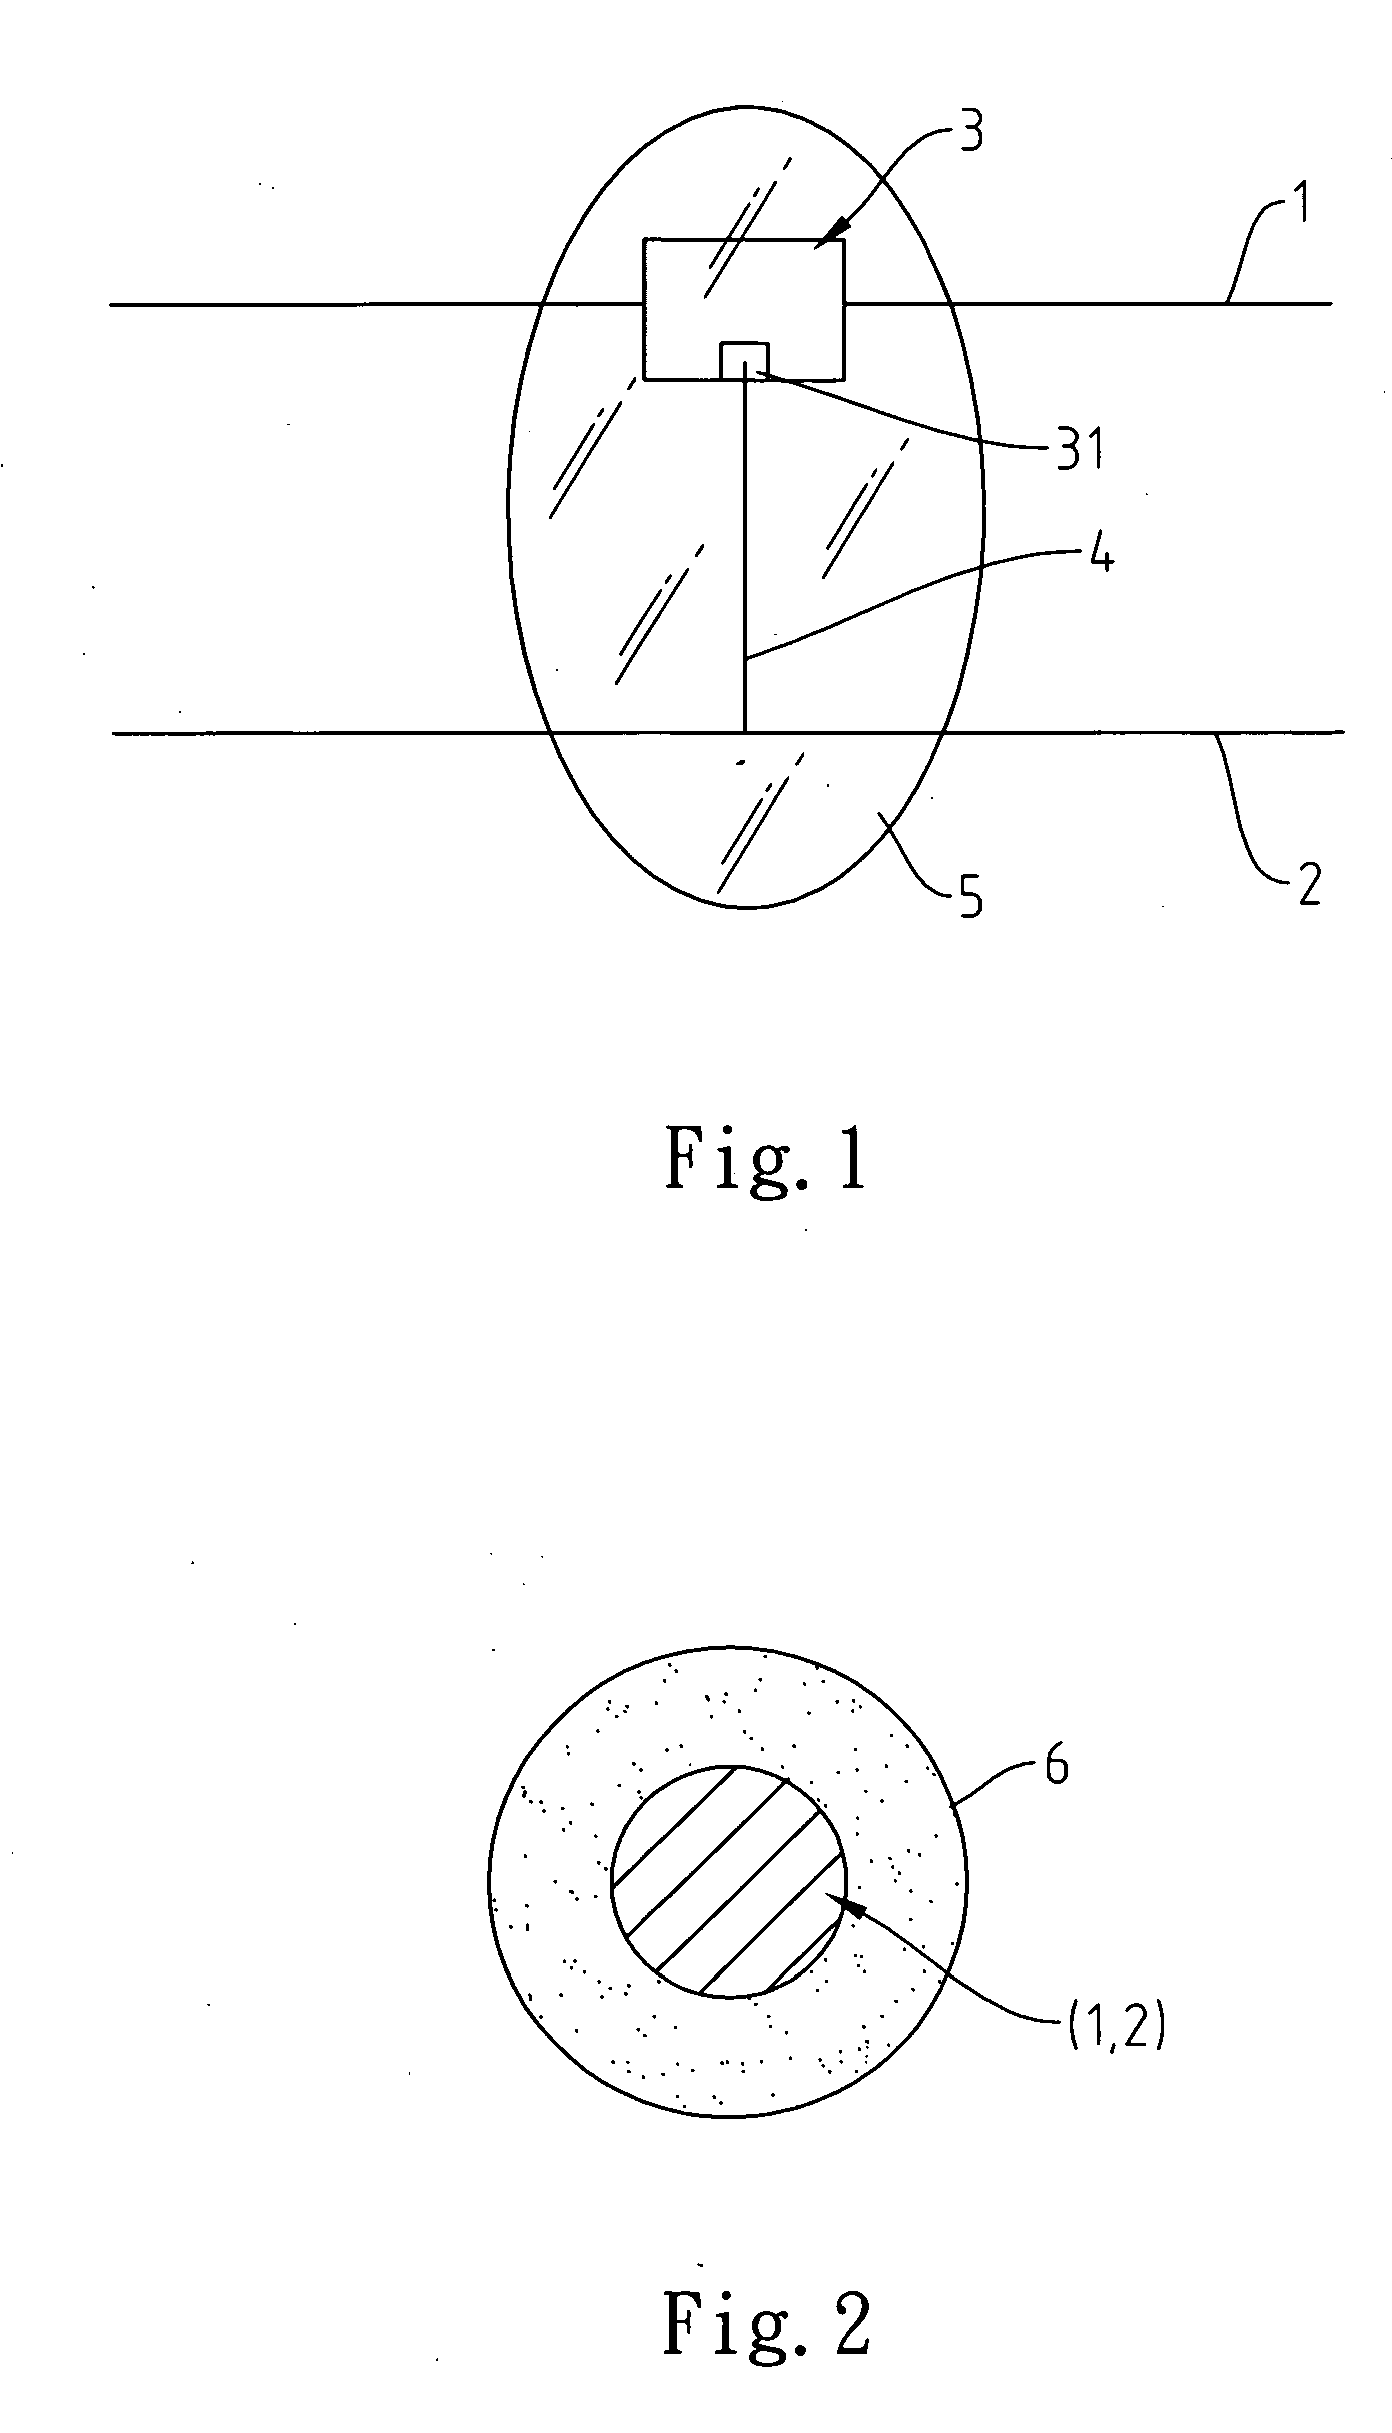 Flexible conducting wire structure having light emitters